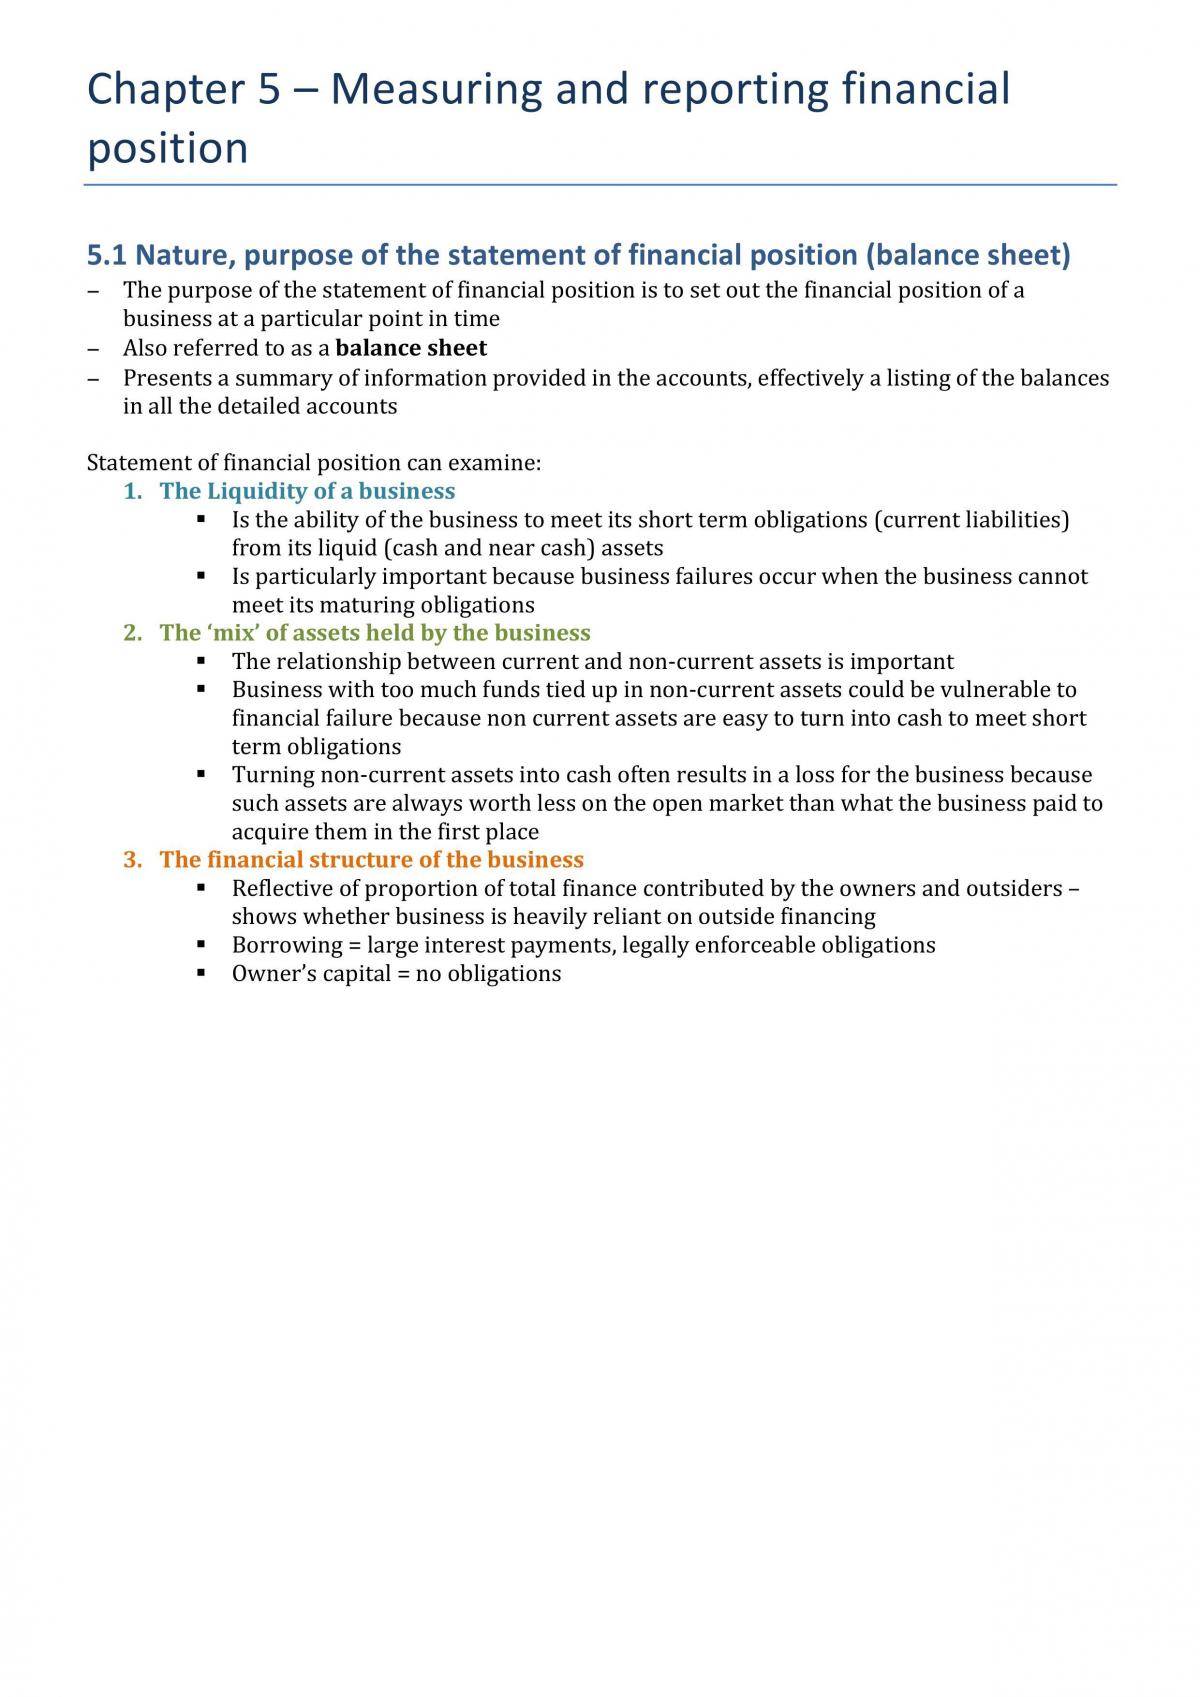 Measuring and reporting financial position - Page 1